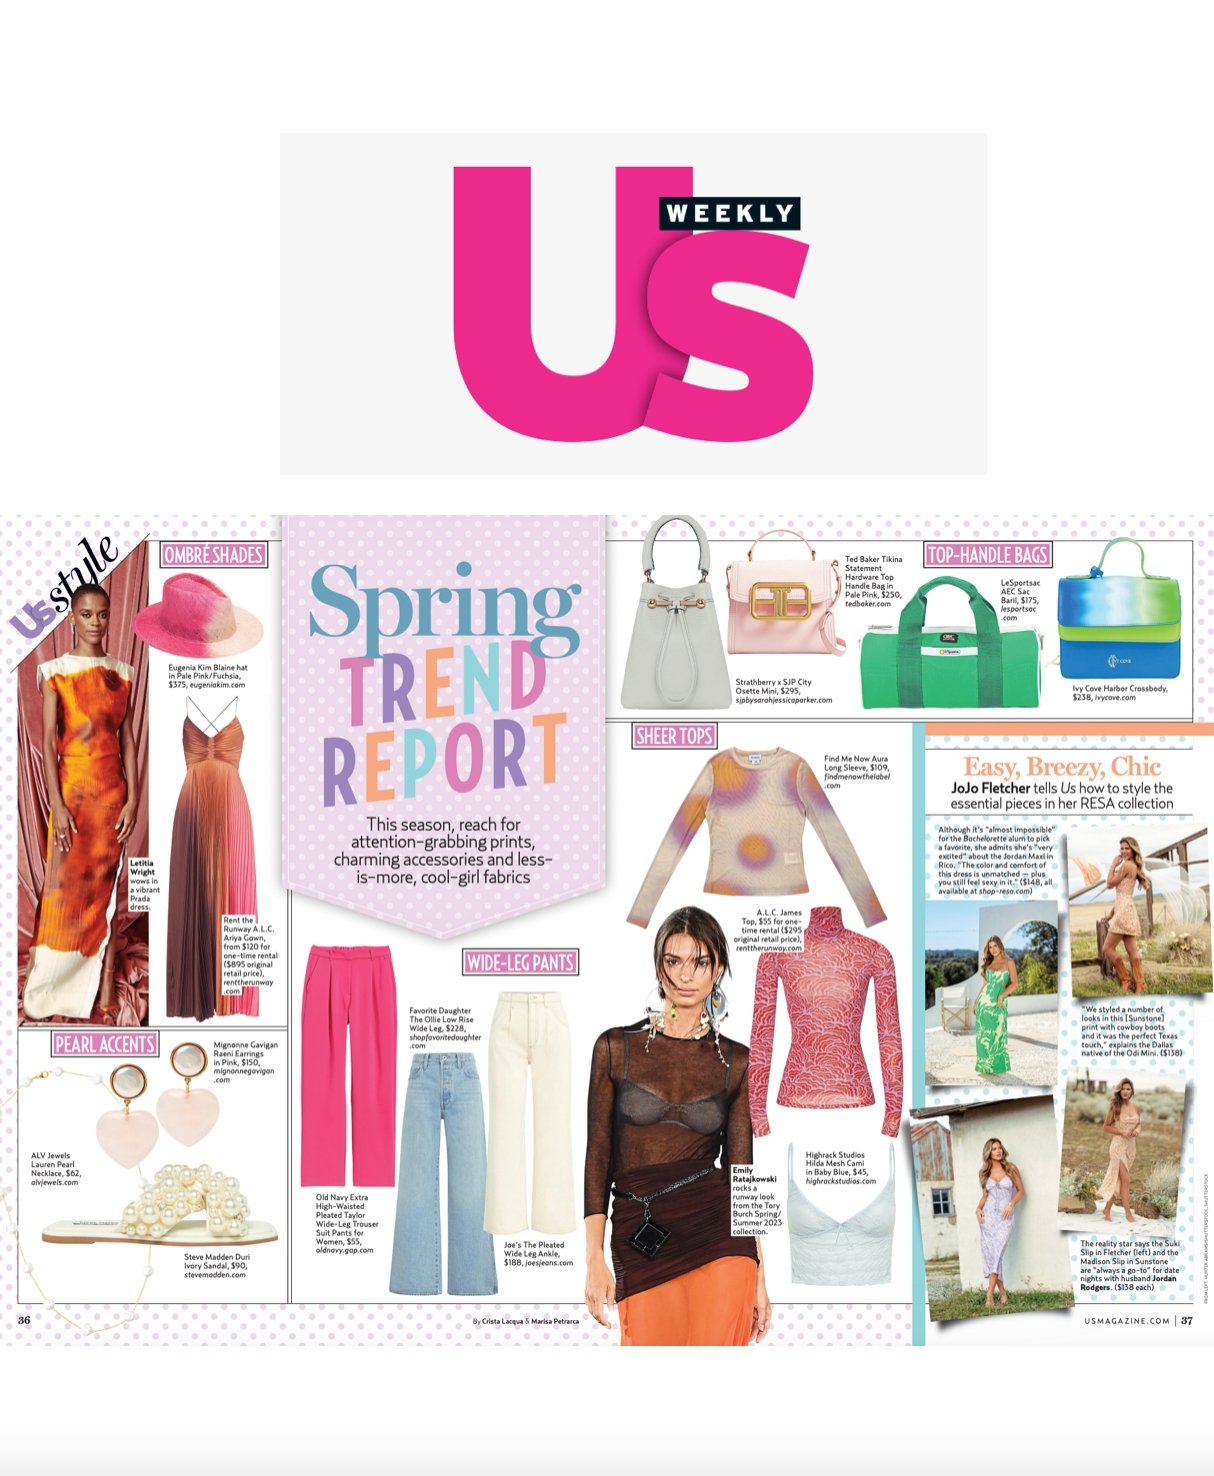 We're Featured in US Weekly's Spring Trend Report - Ivy Cove Montecito